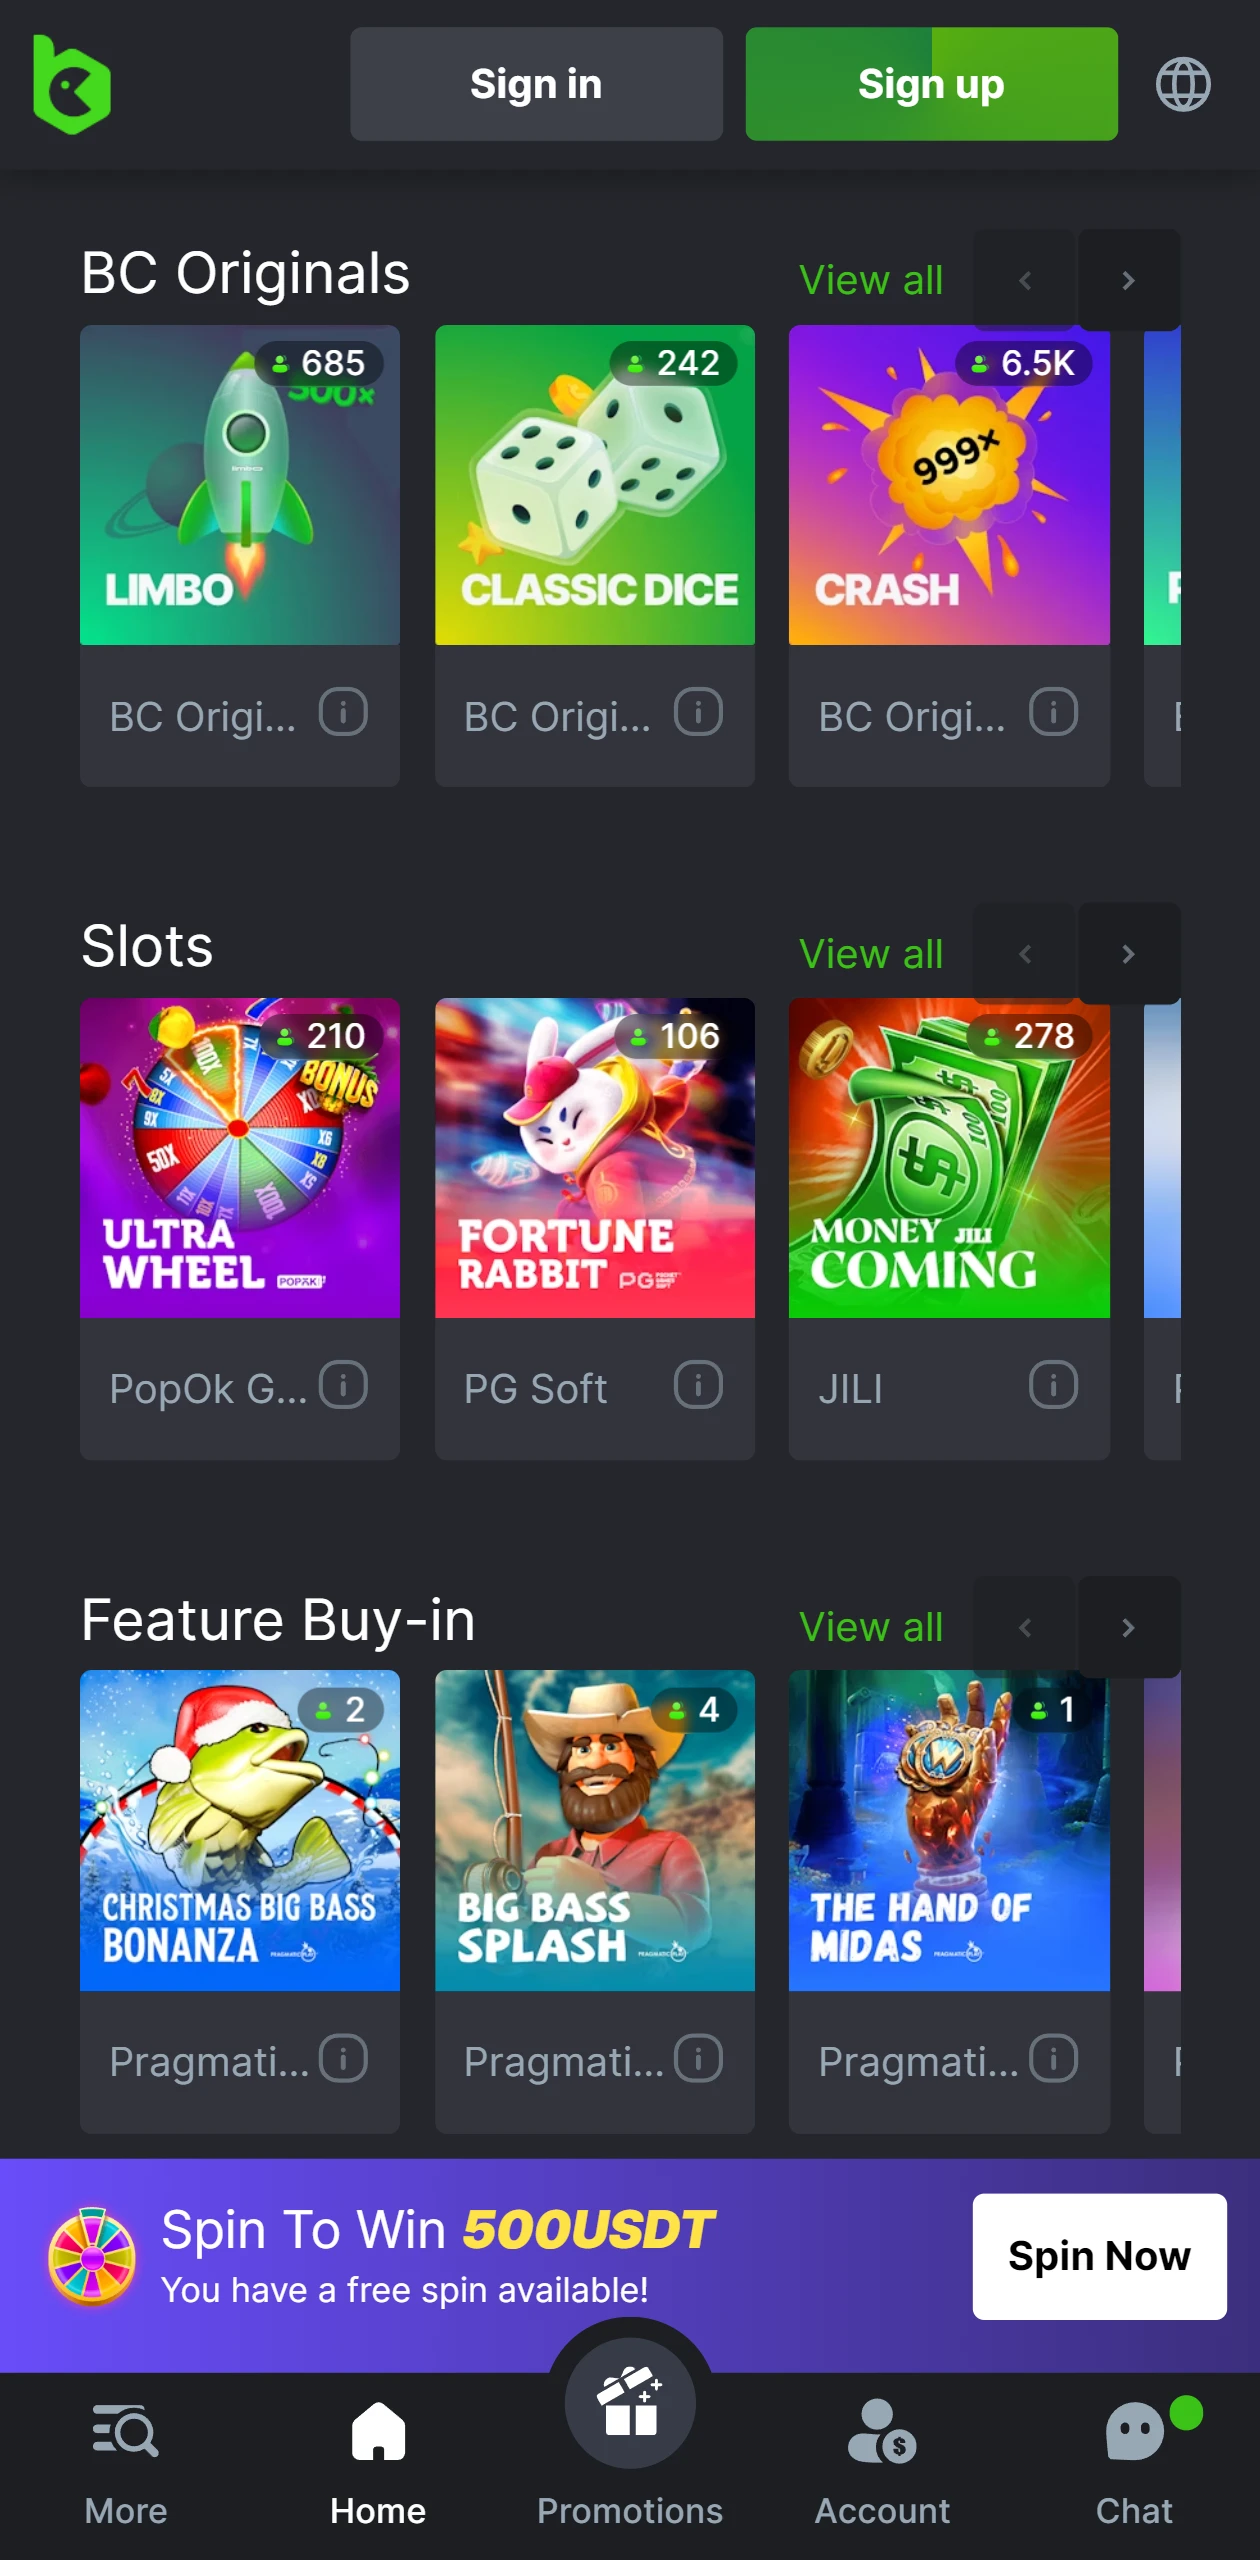 BC Game offers many games in the casino section.